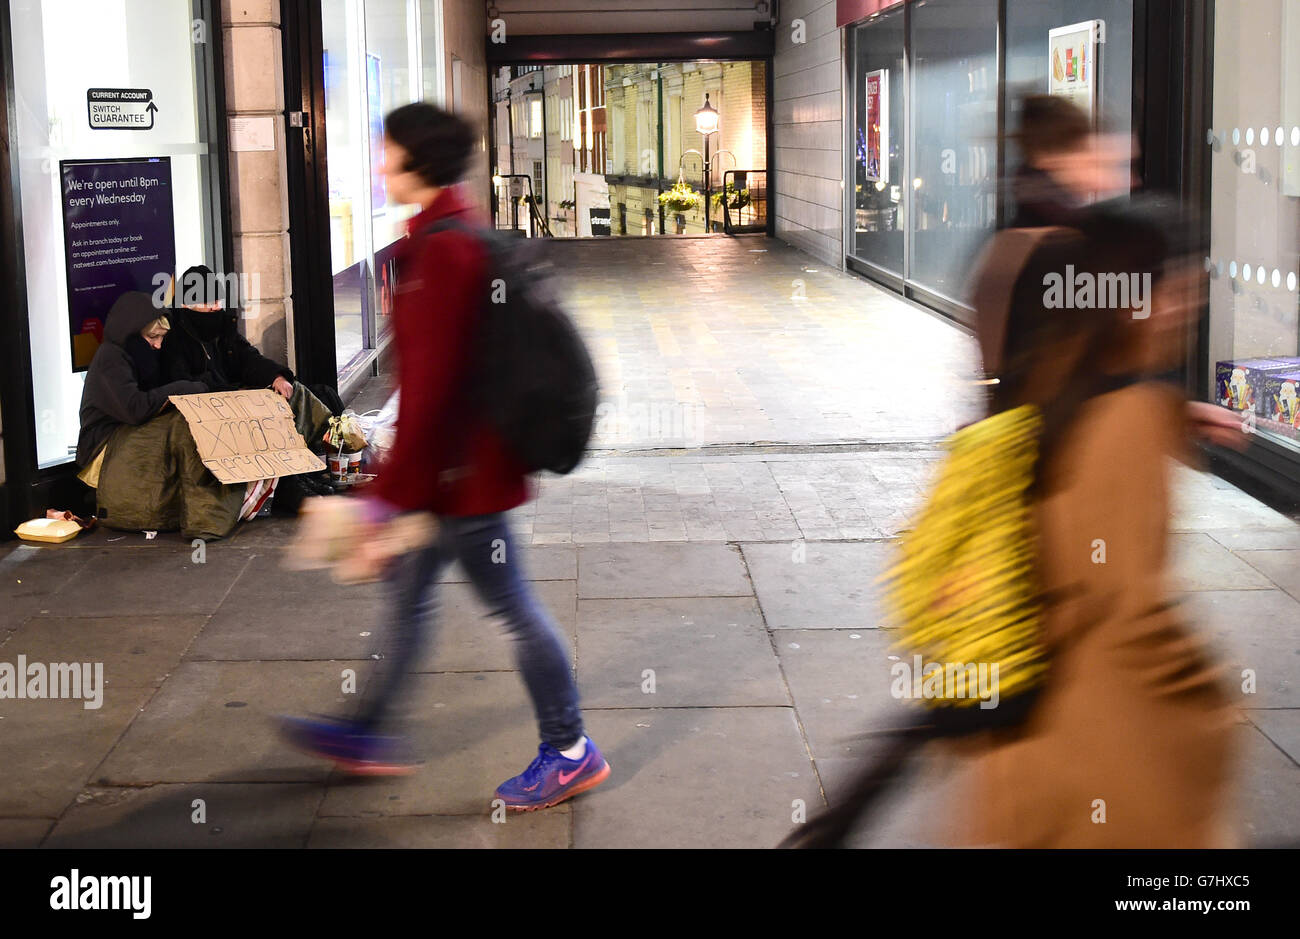 Homelessness In London The Homeless On The Streets Of London Stock Photo Alamy